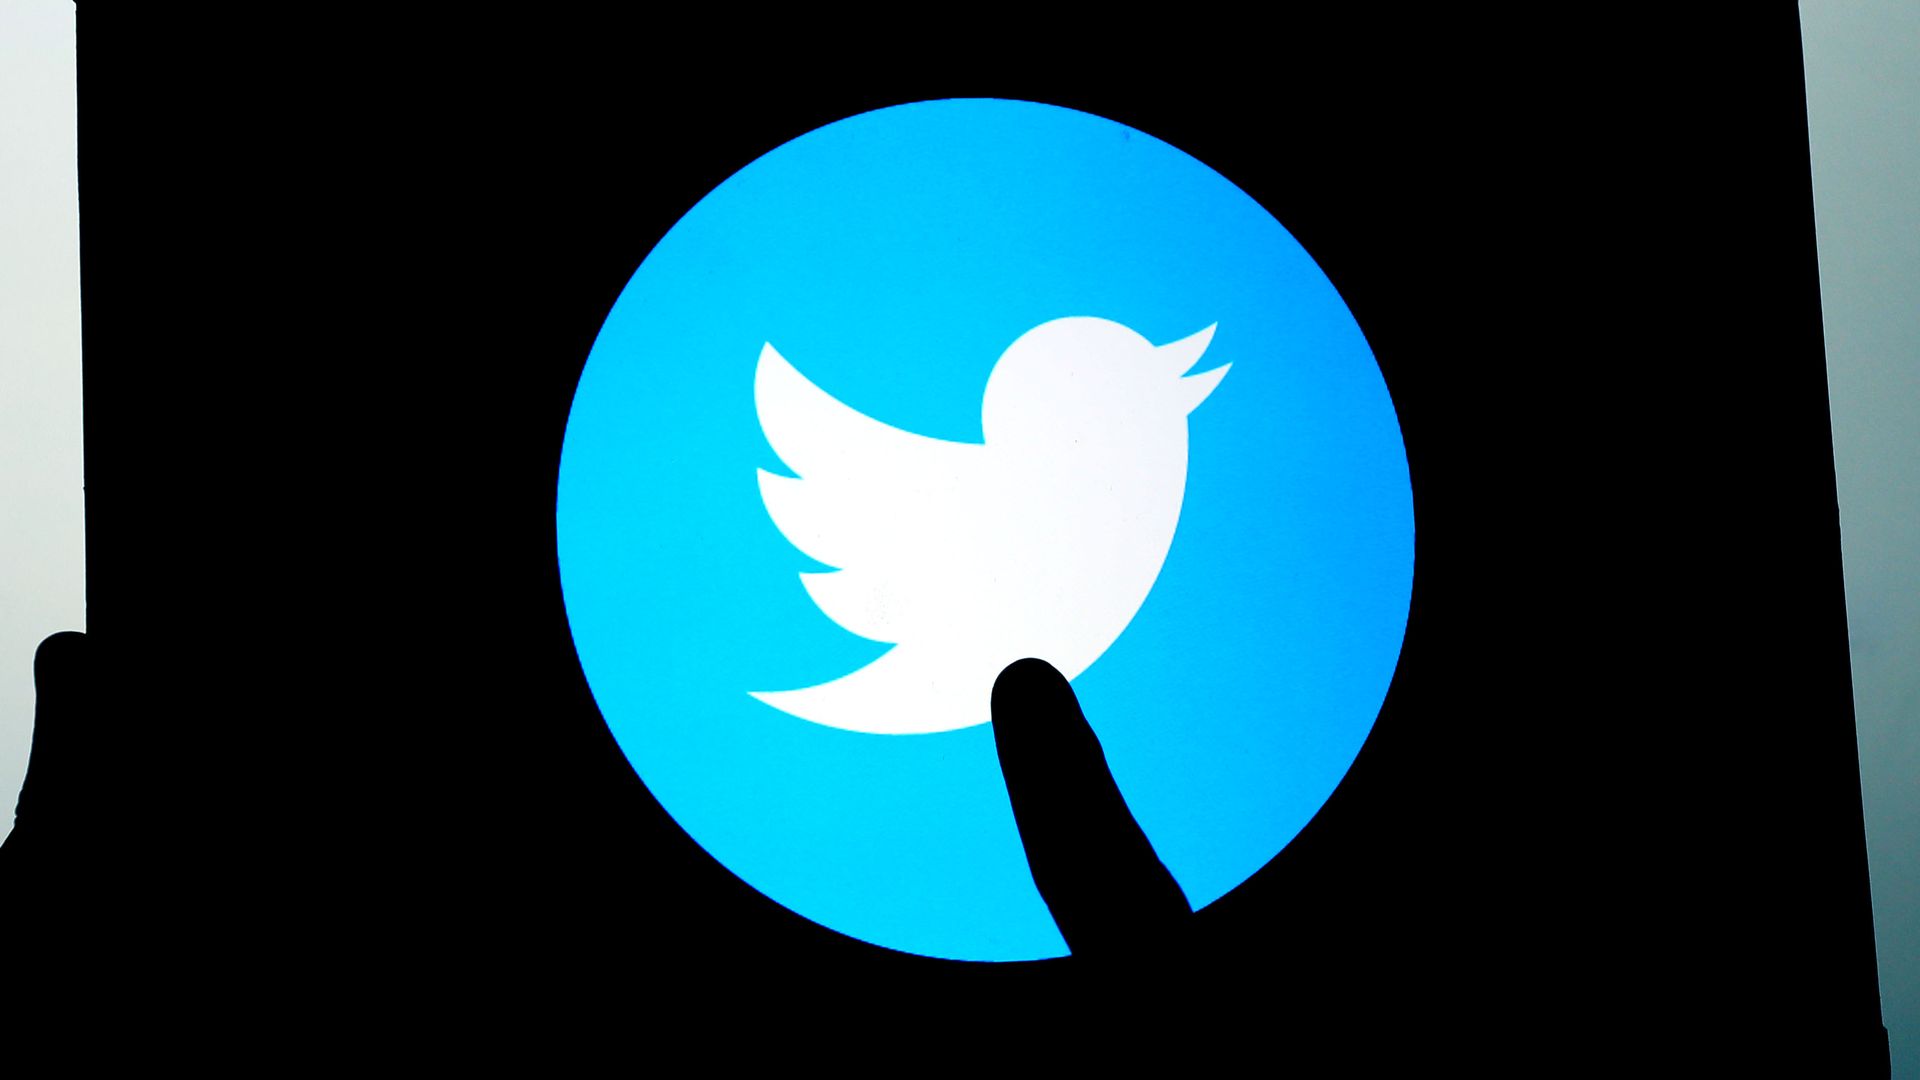 A photo illustration of a hand in silhouette pointing at the Twitter logo prominently displayed on a tablet screen.